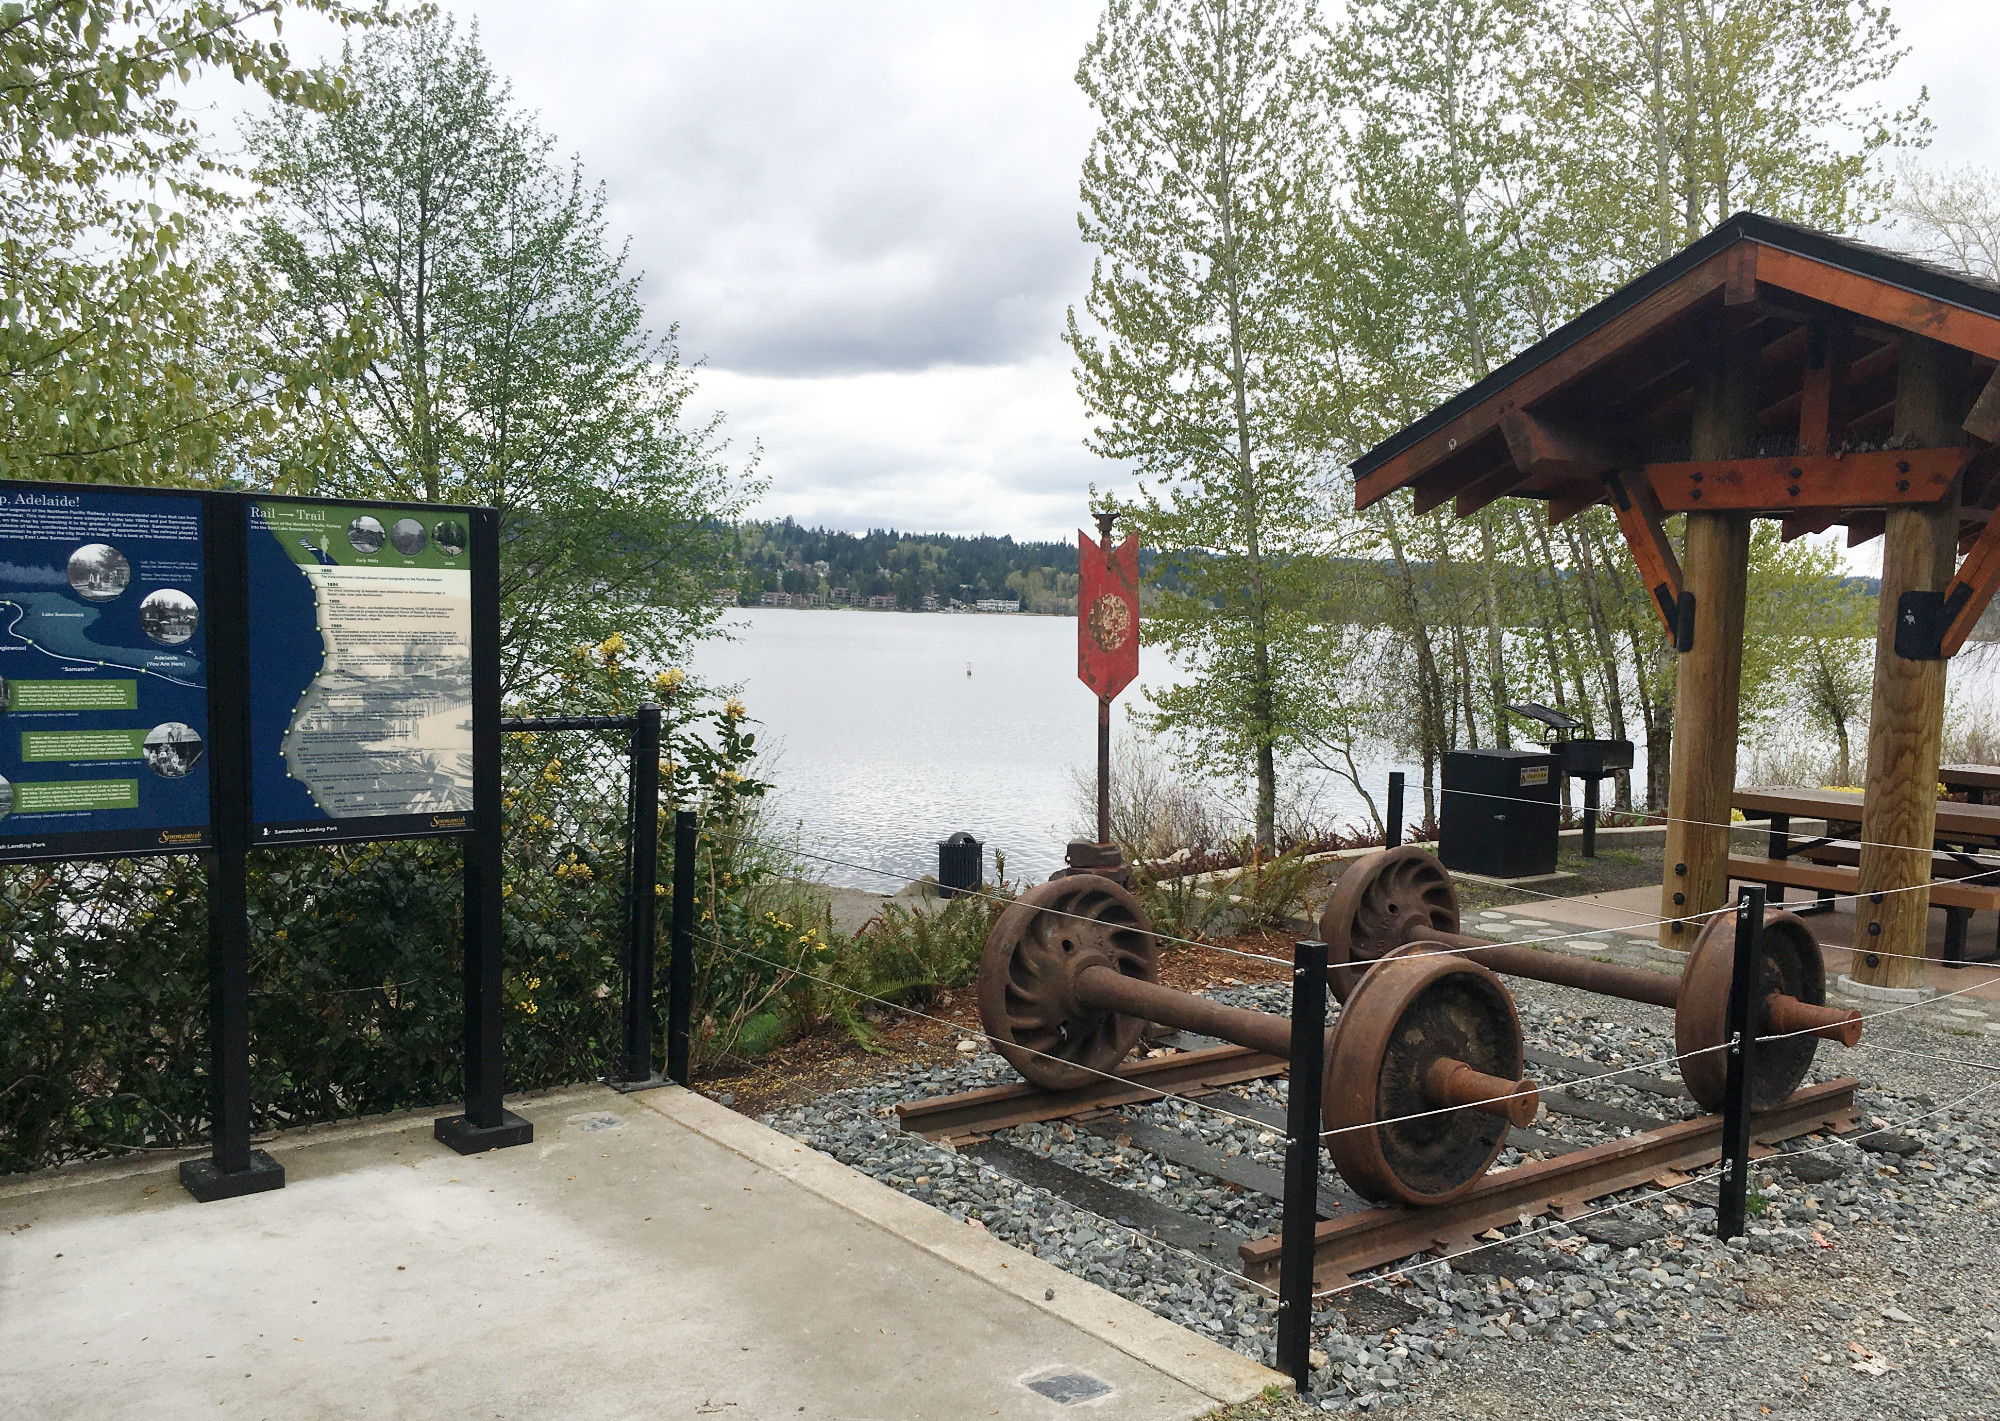 Antique train axles are displayed at Sammamish Landing Park next to educational signage, a picnic shelter, and Lake Sammamish.